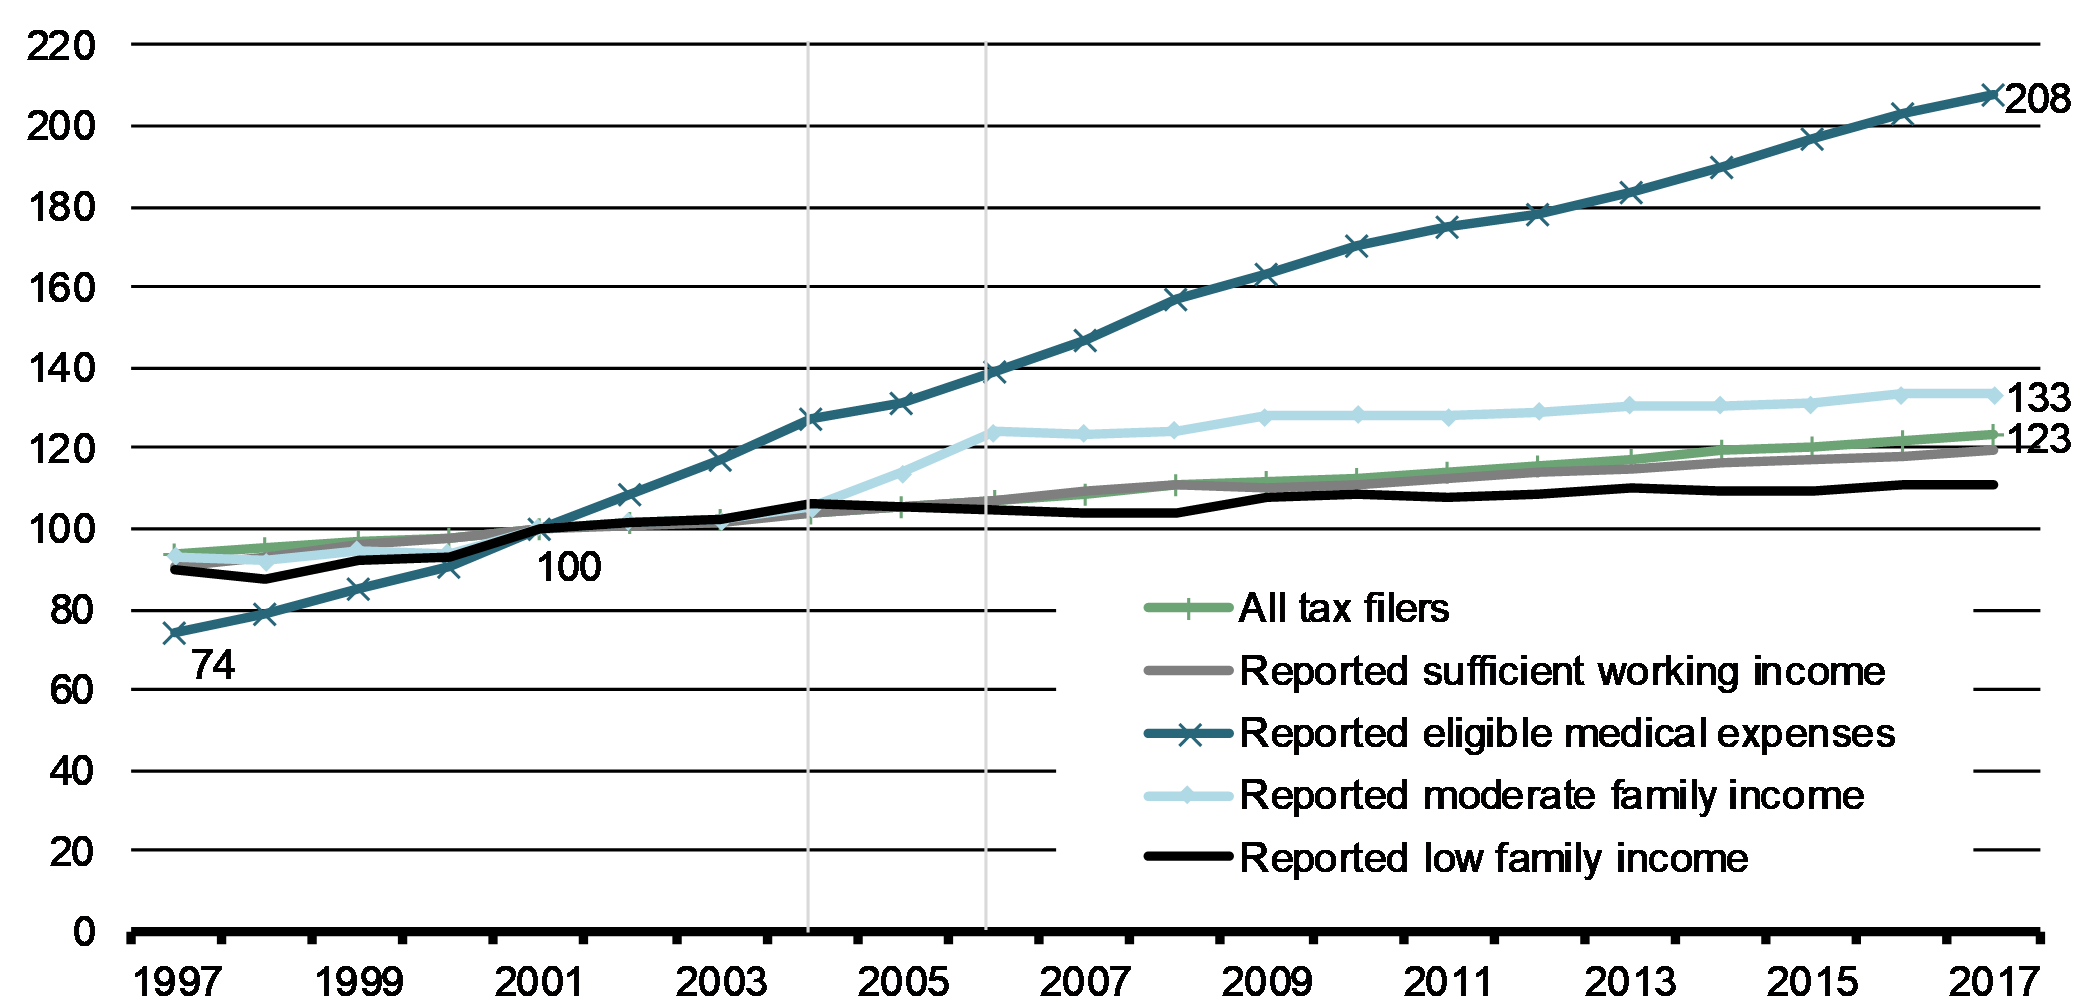 Figure 2 - Changes in the number of taxfilers based on their eligibility for the RMES, 1997 to 2017 (base 2001=100)